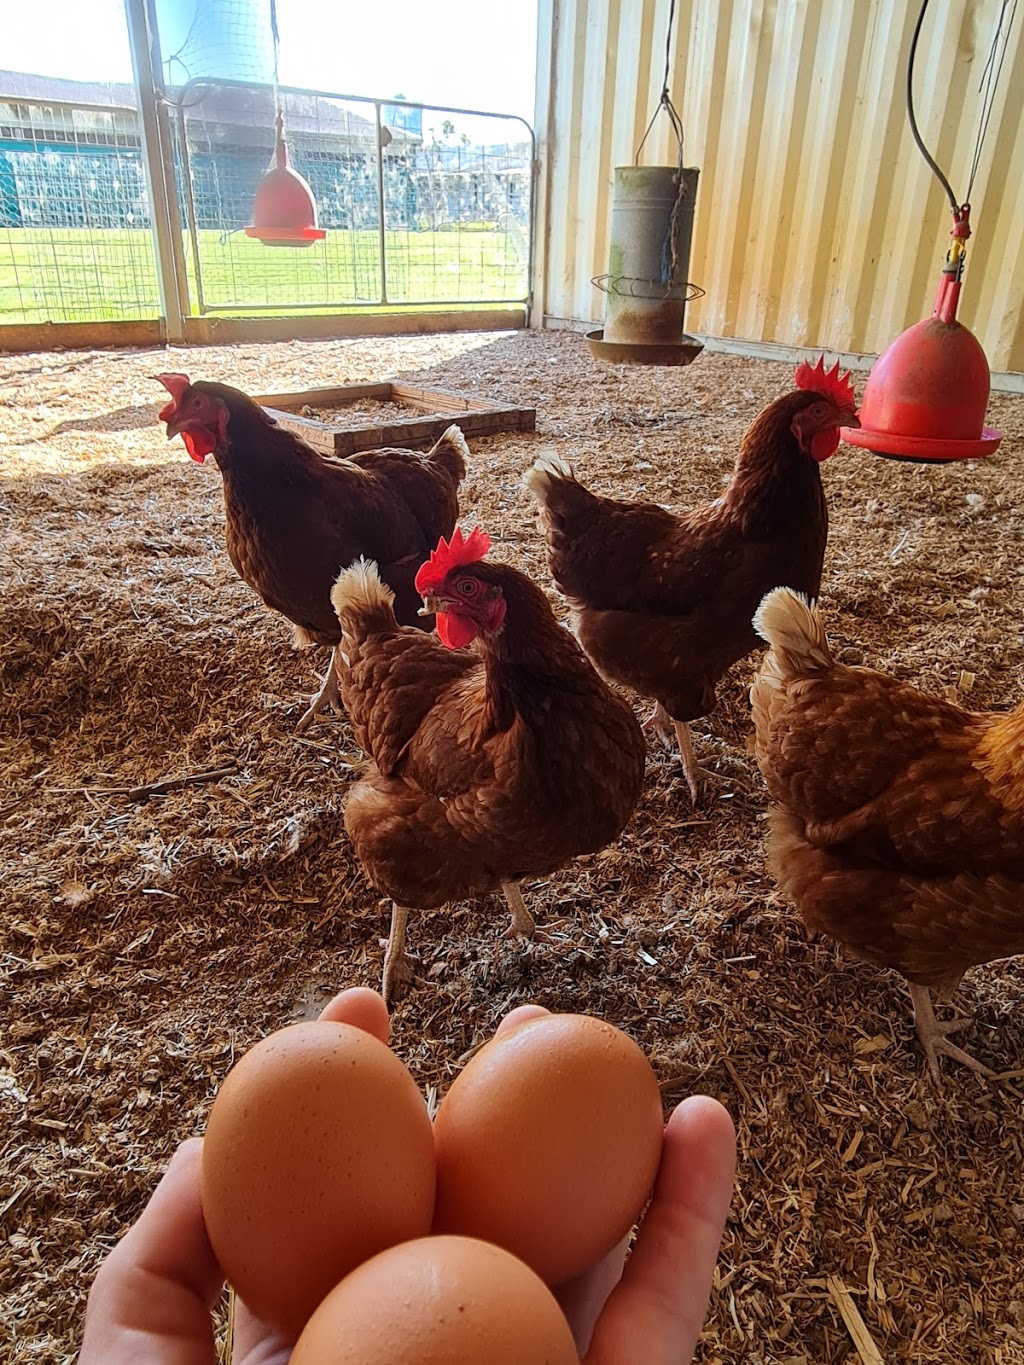 Hunter Valley Hens And Grain | food | 931 Richardson Rd, Campvale NSW 2318, Australia | 0409398122 OR +61 409 398 122